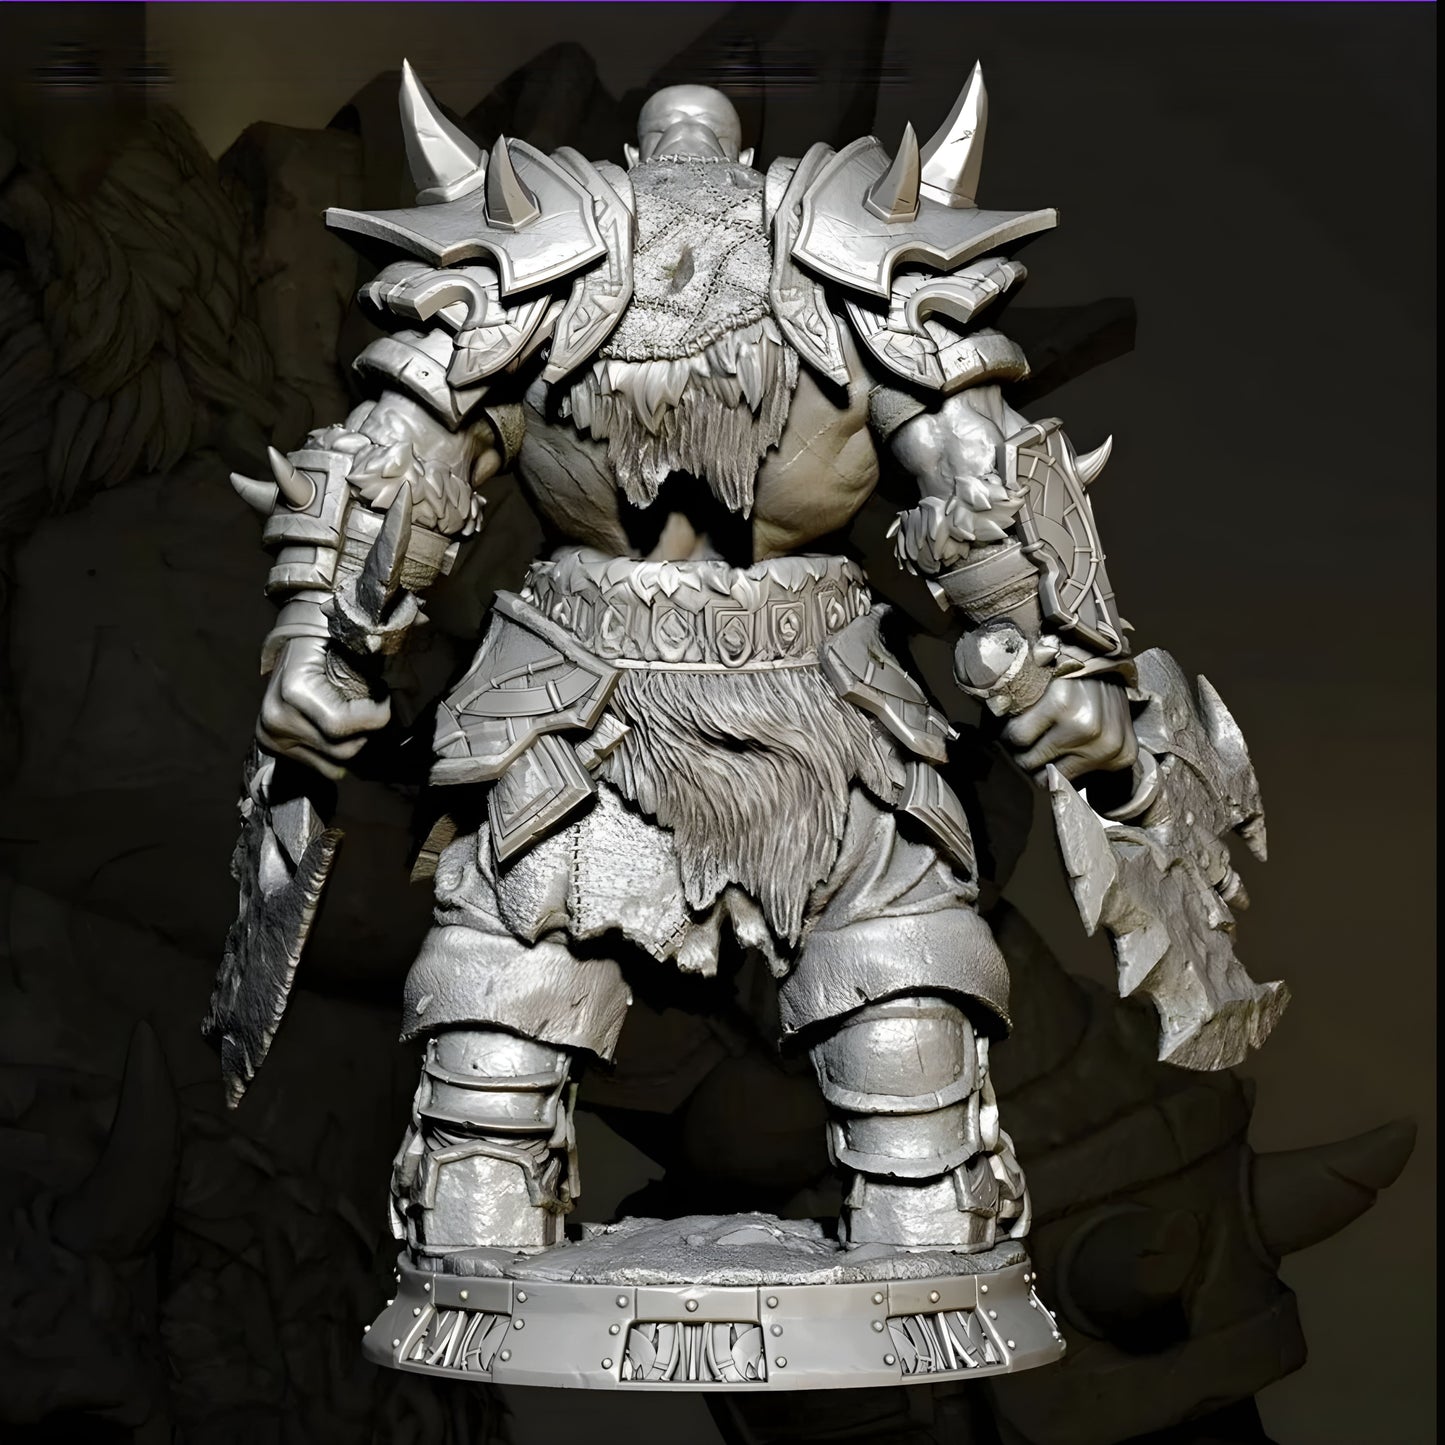 18+ Collector's 3D Printed Model: 50mm 75mm Resin model kits figure colorless and self-assembled TD-4249